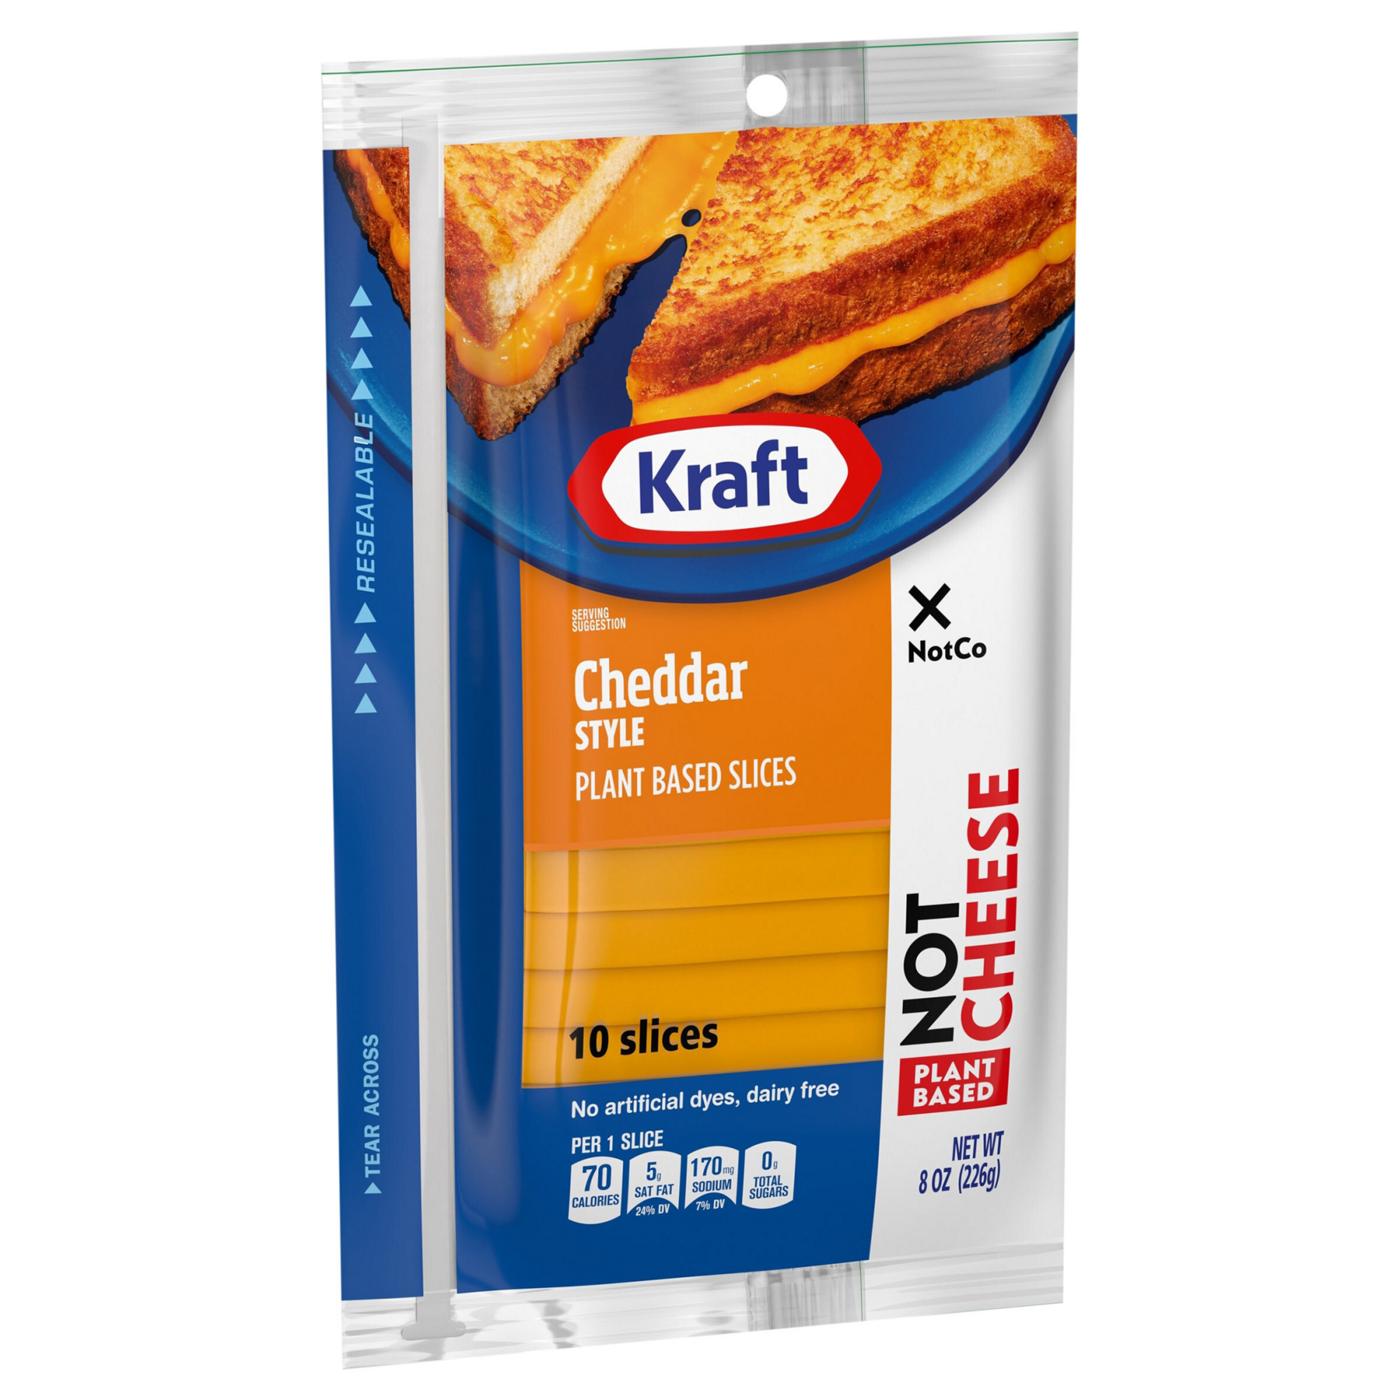 Kraft Not Cheese Plant Based Slices - Cheddar Style; image 3 of 8